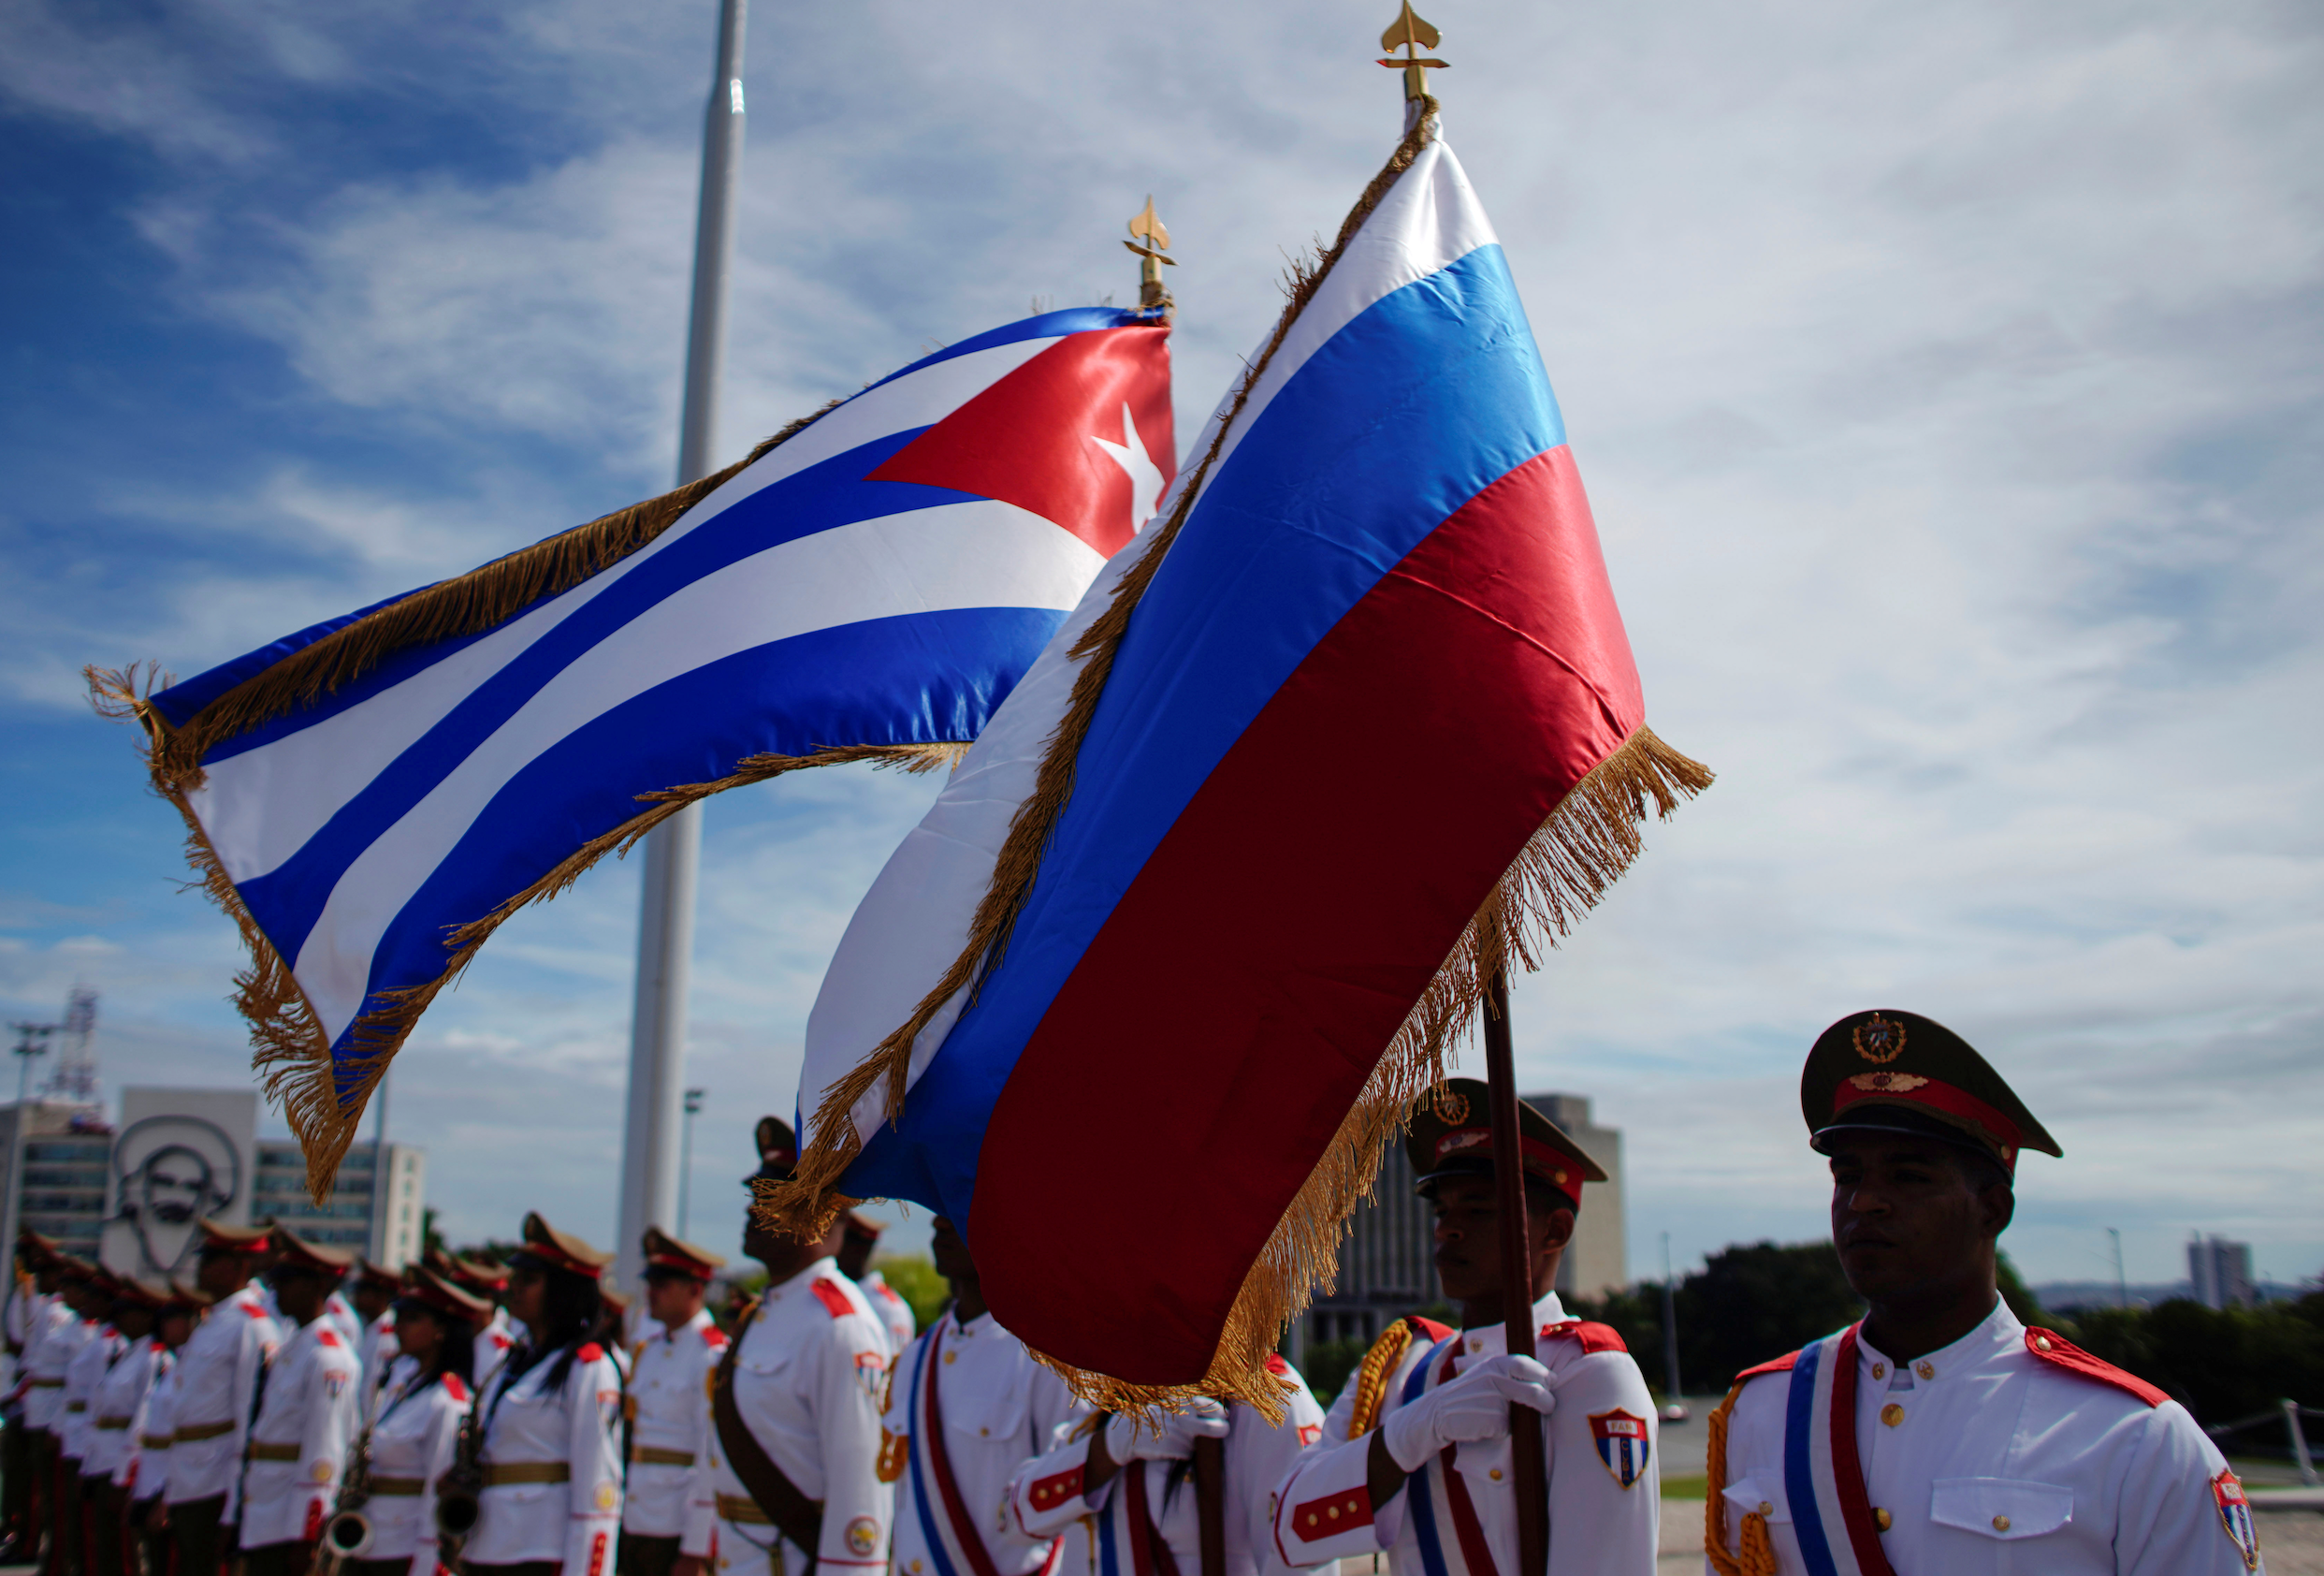 Honor guards hold a Russian and a Cuban flag during a wreath-laying ceremony with Russia's Prime Minister Dmitry Medvedev